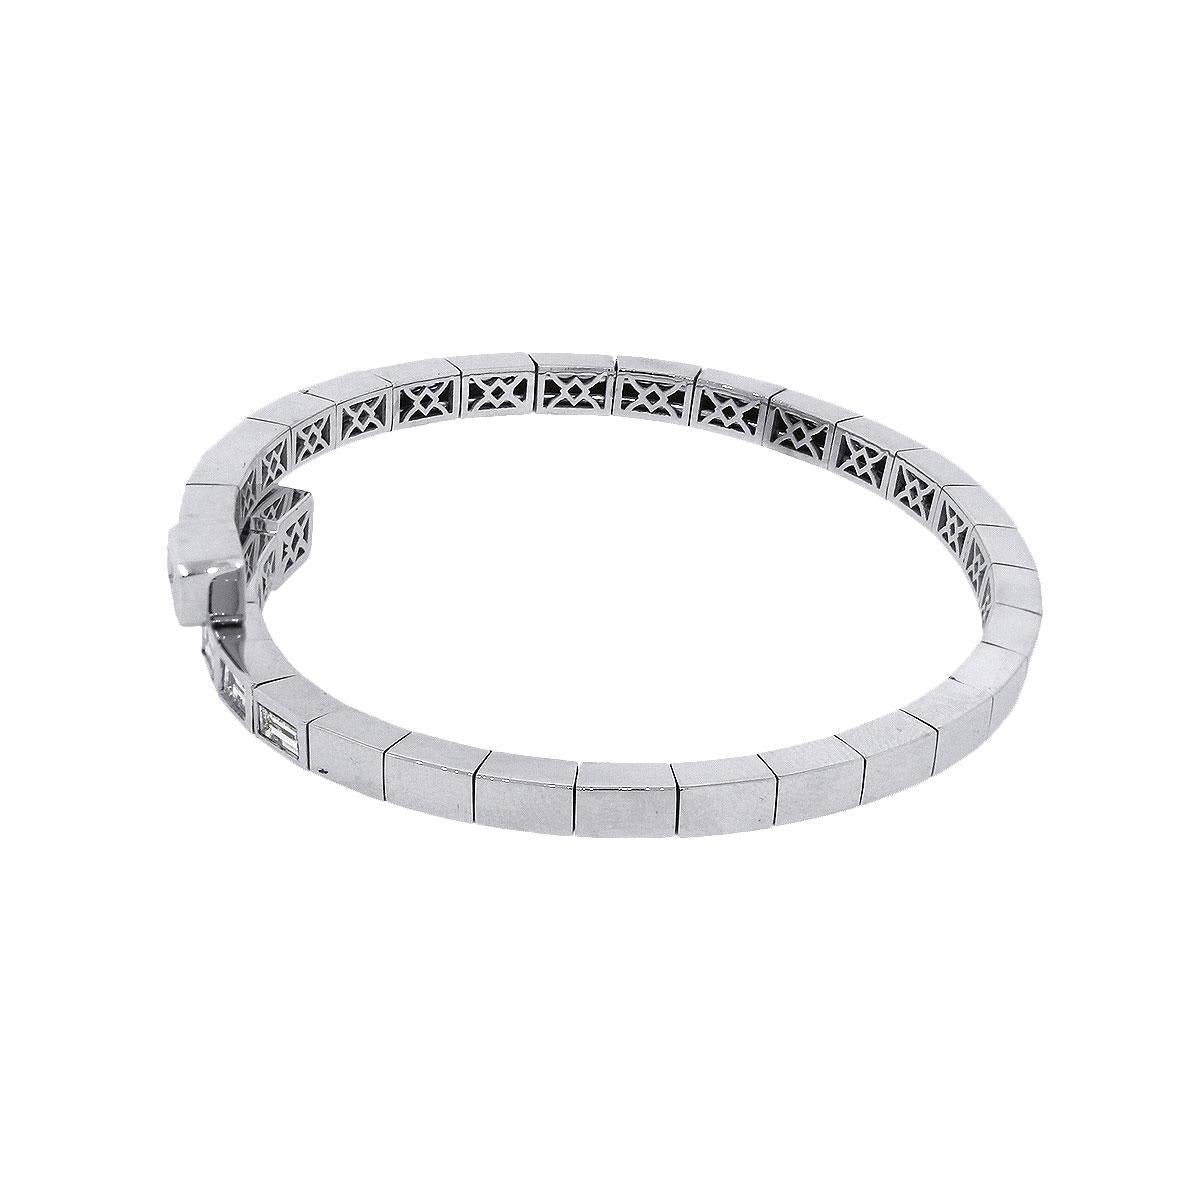 Style: Baguette Diamond Crossover Bangle
Material: 14k white gold
Diamond Details: Approximately 3.12ctw of round brilliant diamonds. Diamonds are G/H in color and SI in clarity.
Total Weight: 22.4g (14.4dwt)
Bracelet Measurements: inside